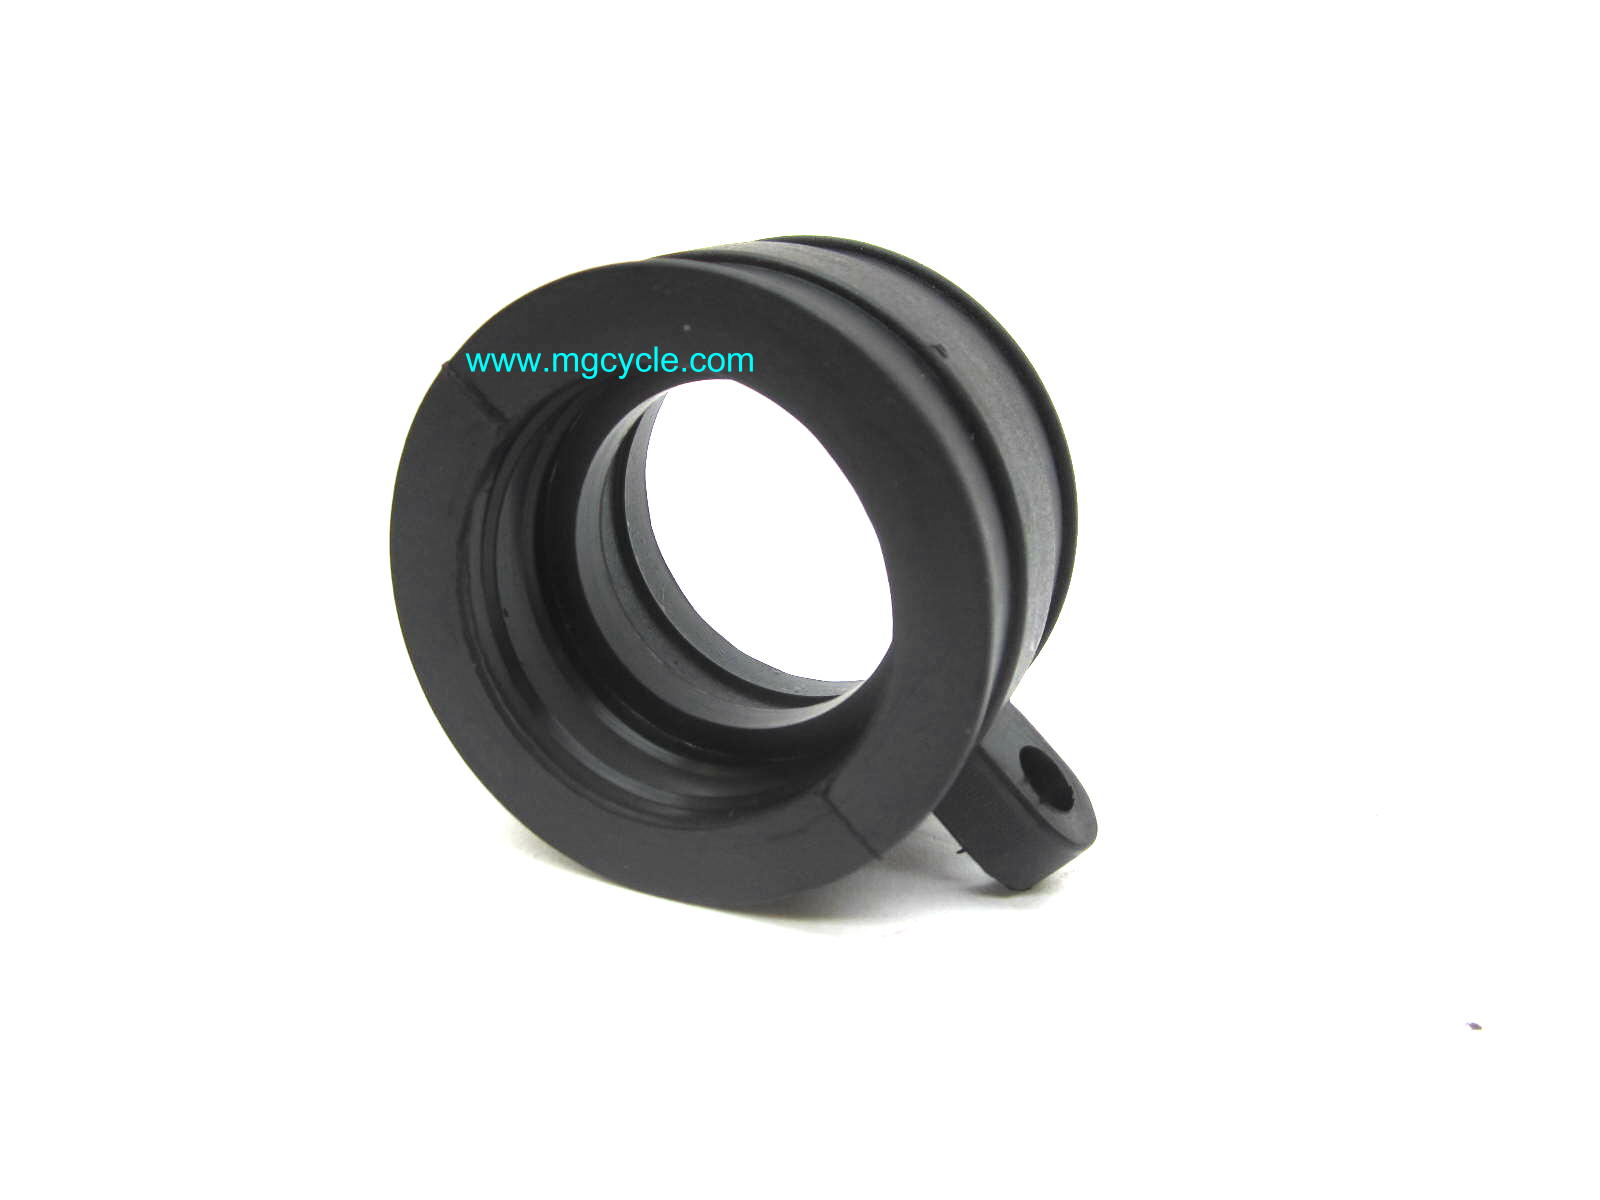 Intake rubber sleeve 30-36mm LM 1/2/3 Cal 2/3/1100 GU14114350 - Click Image to Close